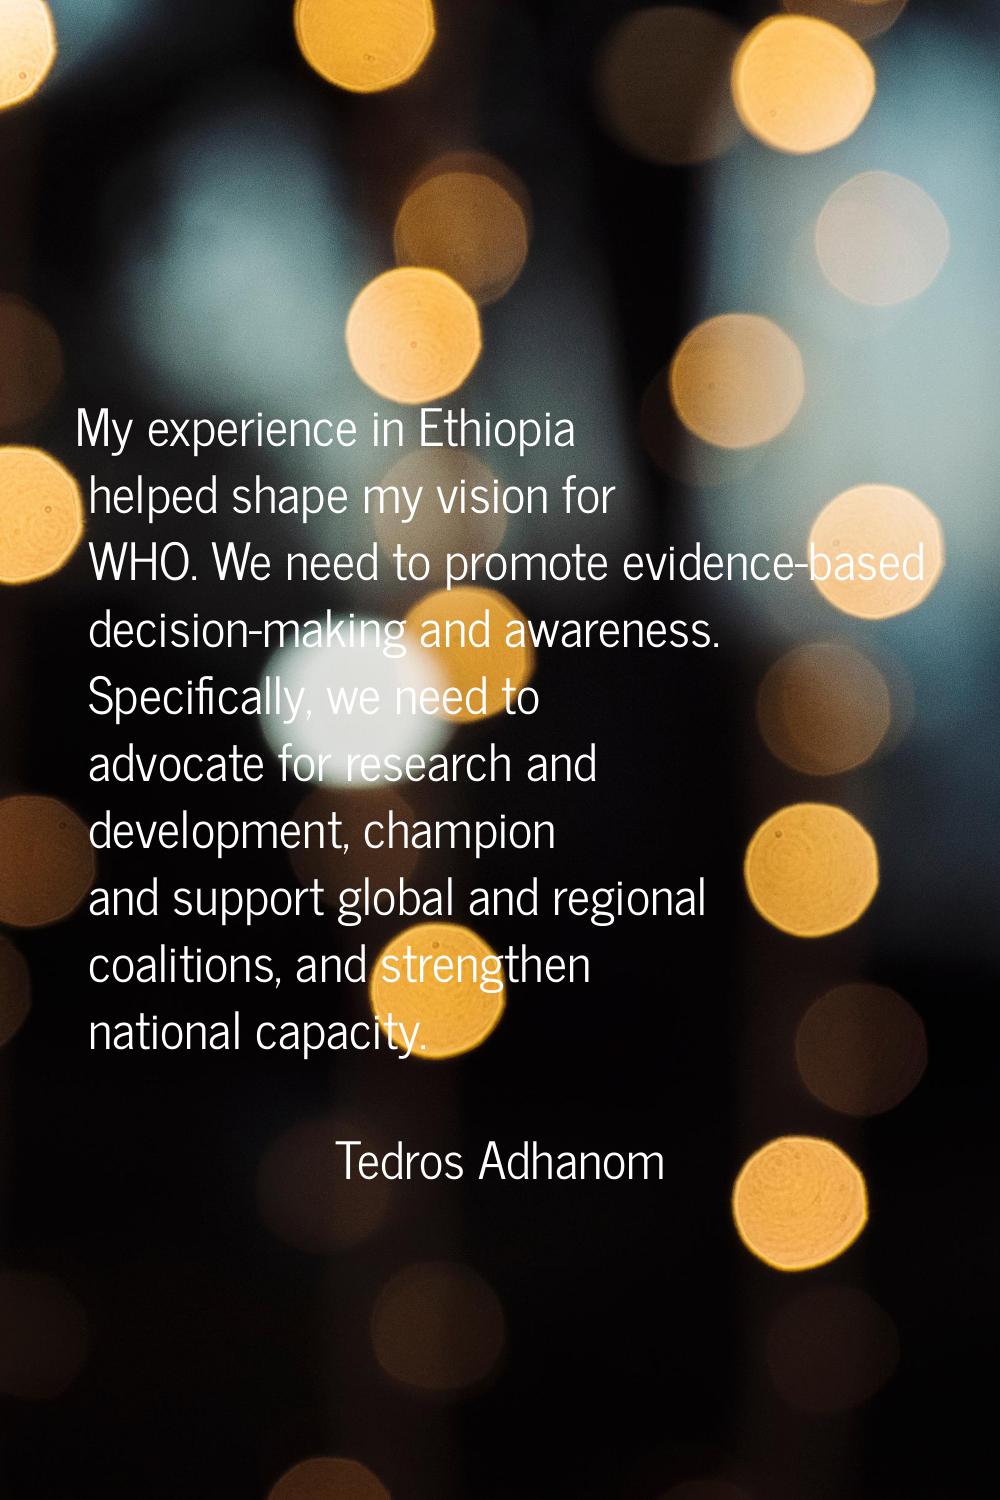 My experience in Ethiopia helped shape my vision for WHO. We need to promote evidence-based decisio